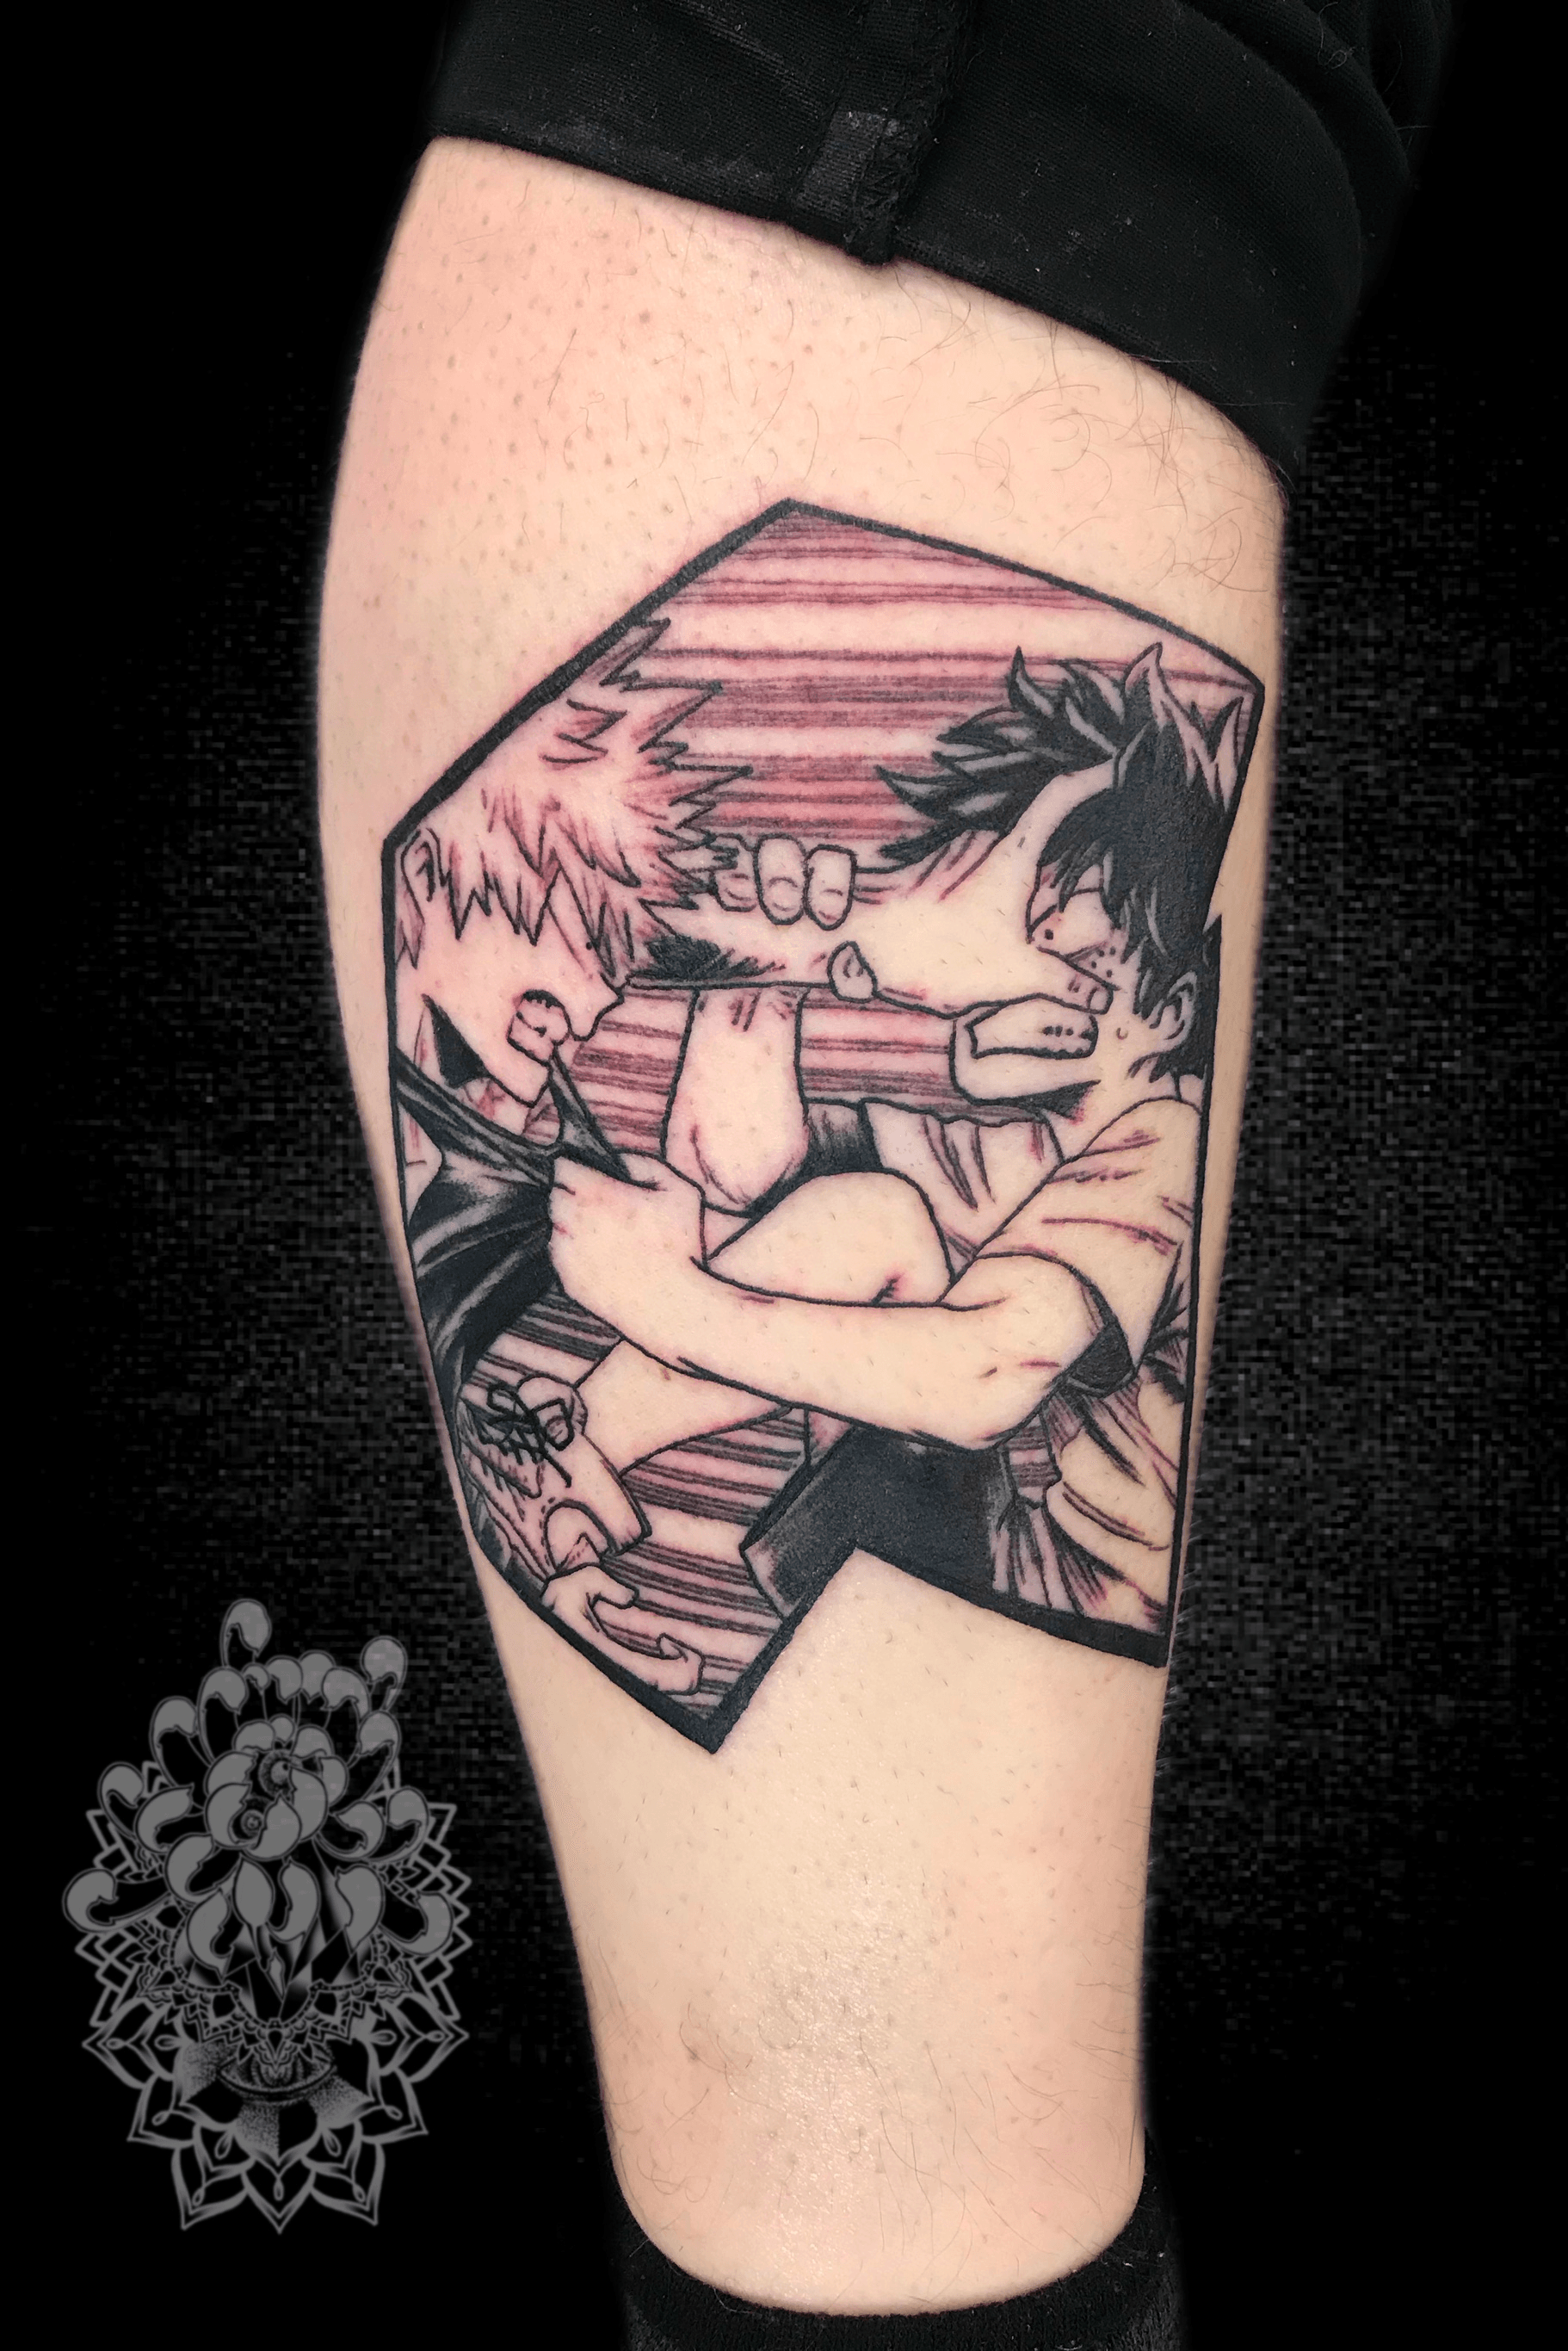 Top 10 Best Anime Tattoo in West Hollywood, CA - September 2023 - Yelp